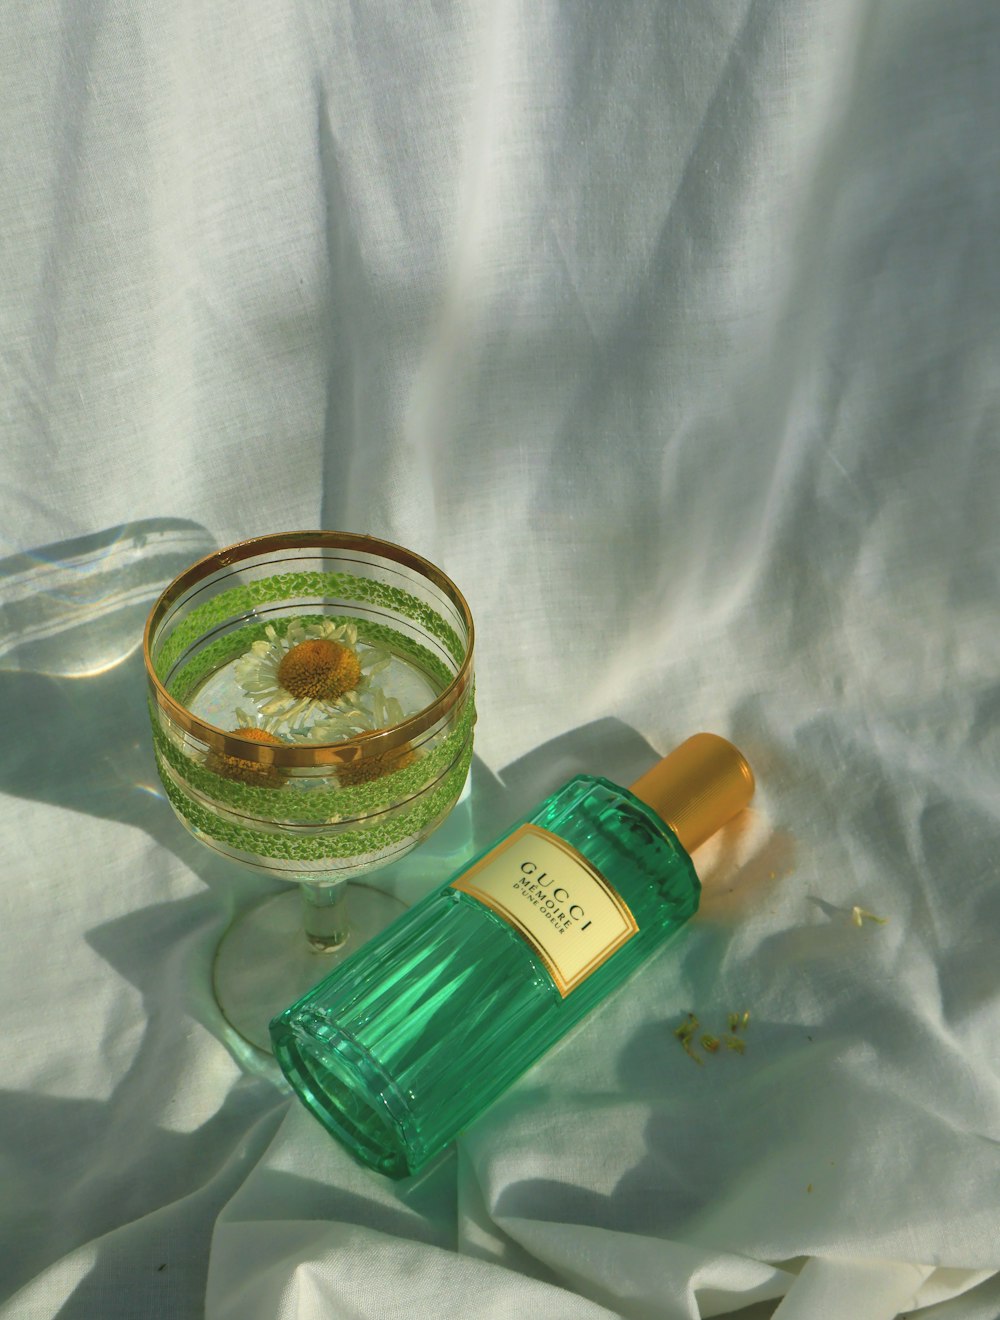 a bottle of perfume next to a glass bowl